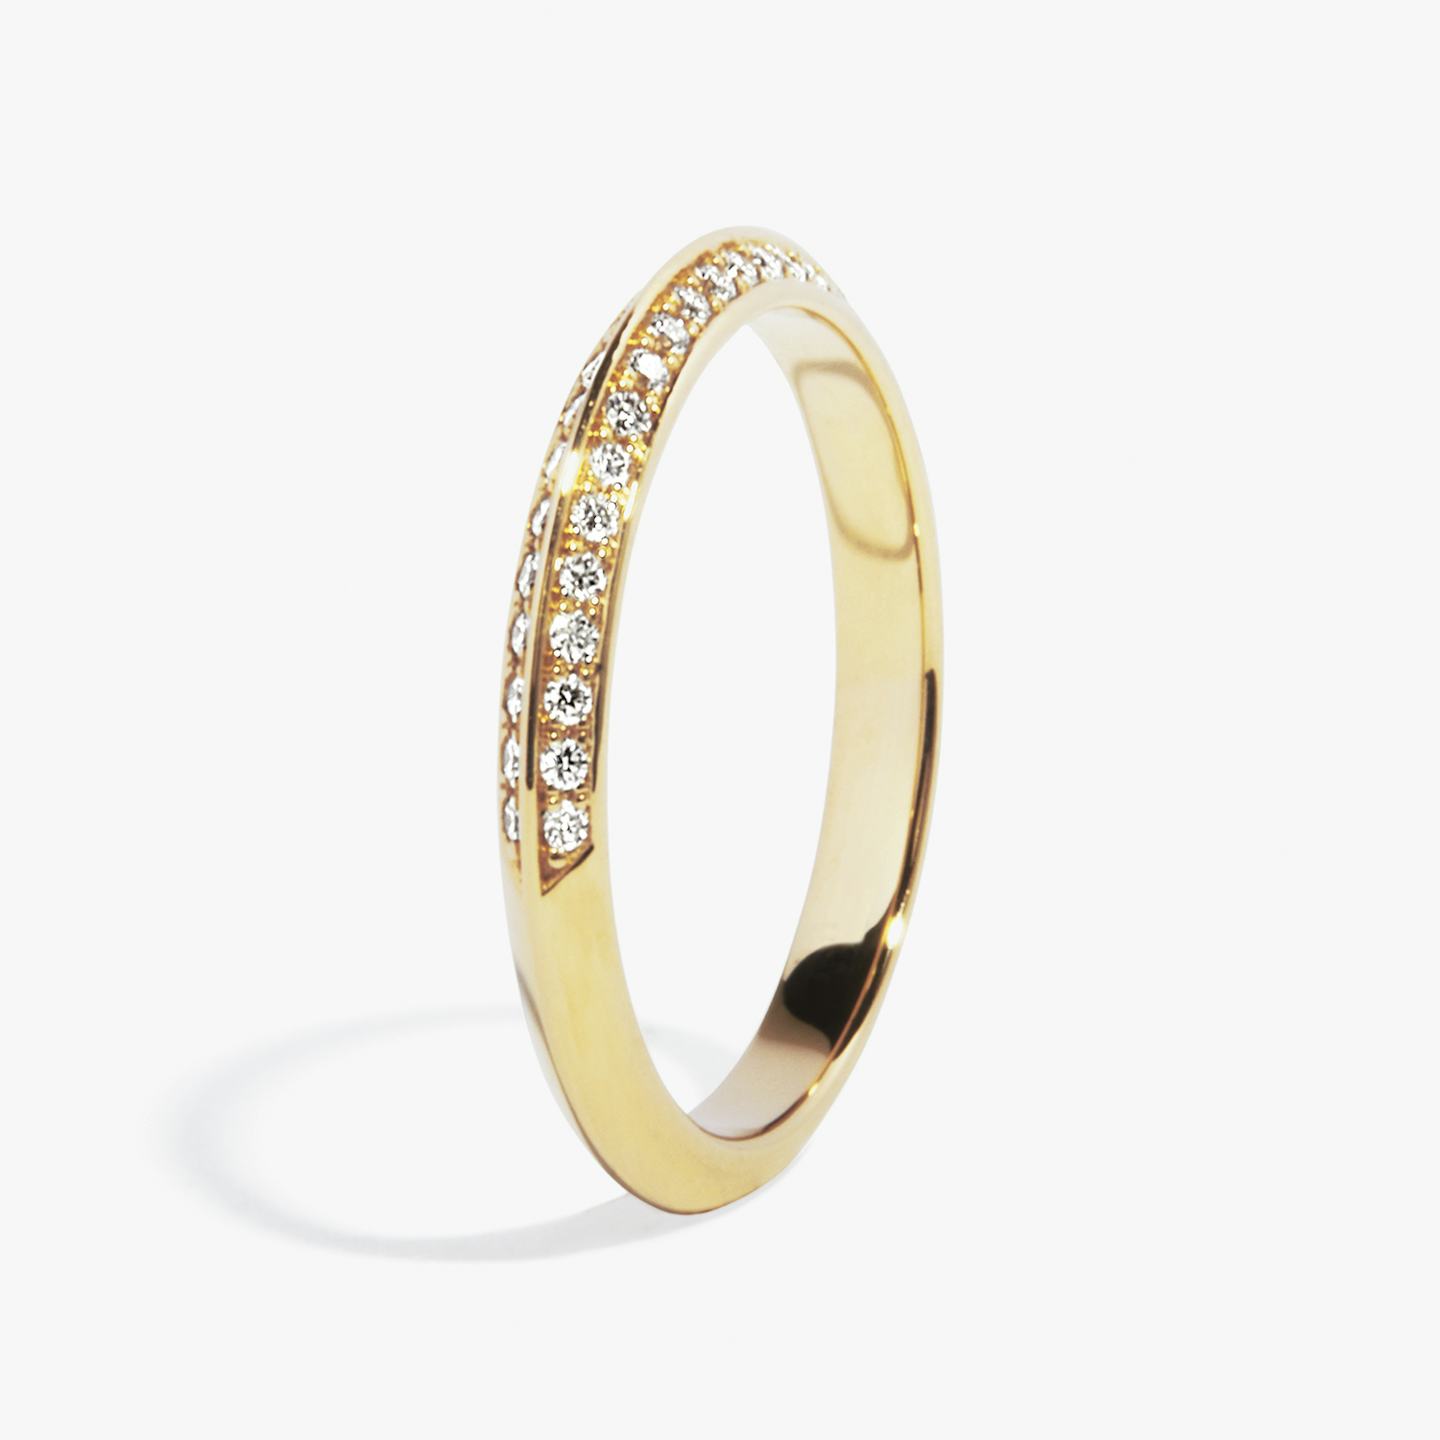 The Knife-Edge Band | Round Brilliant | 18k | 18k Yellow Gold | Band: Pavé